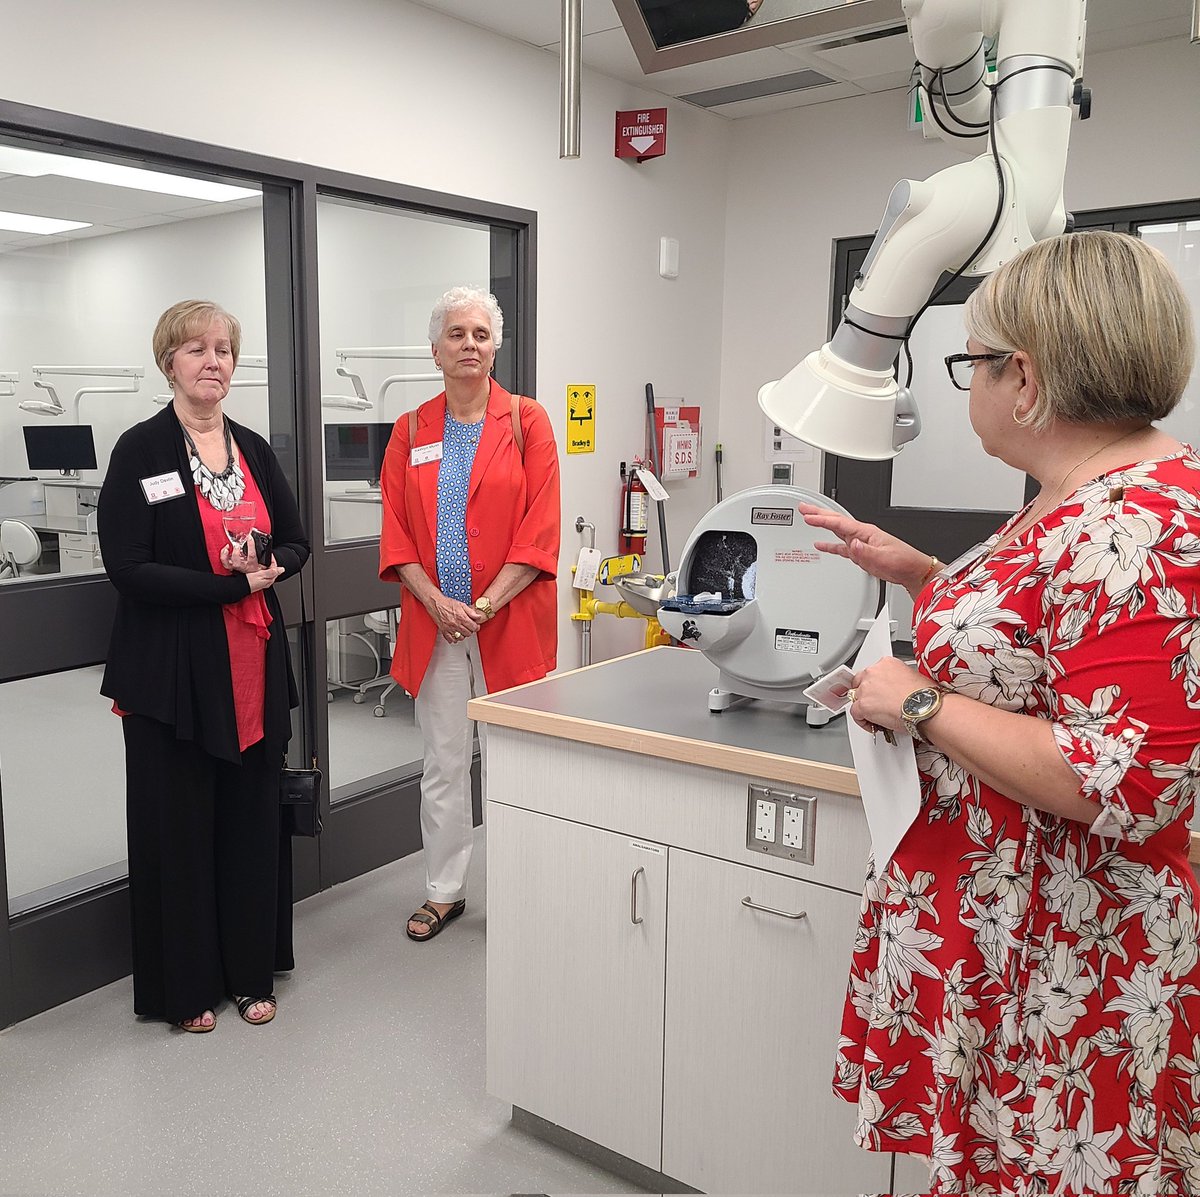 Celebrating past Board Members and retired senior leaders from @FanshaweCollege with the President's Academy @PresFanshaweC. Tours of the Oral Health Clinic and Massage Therapy clinics well under way.